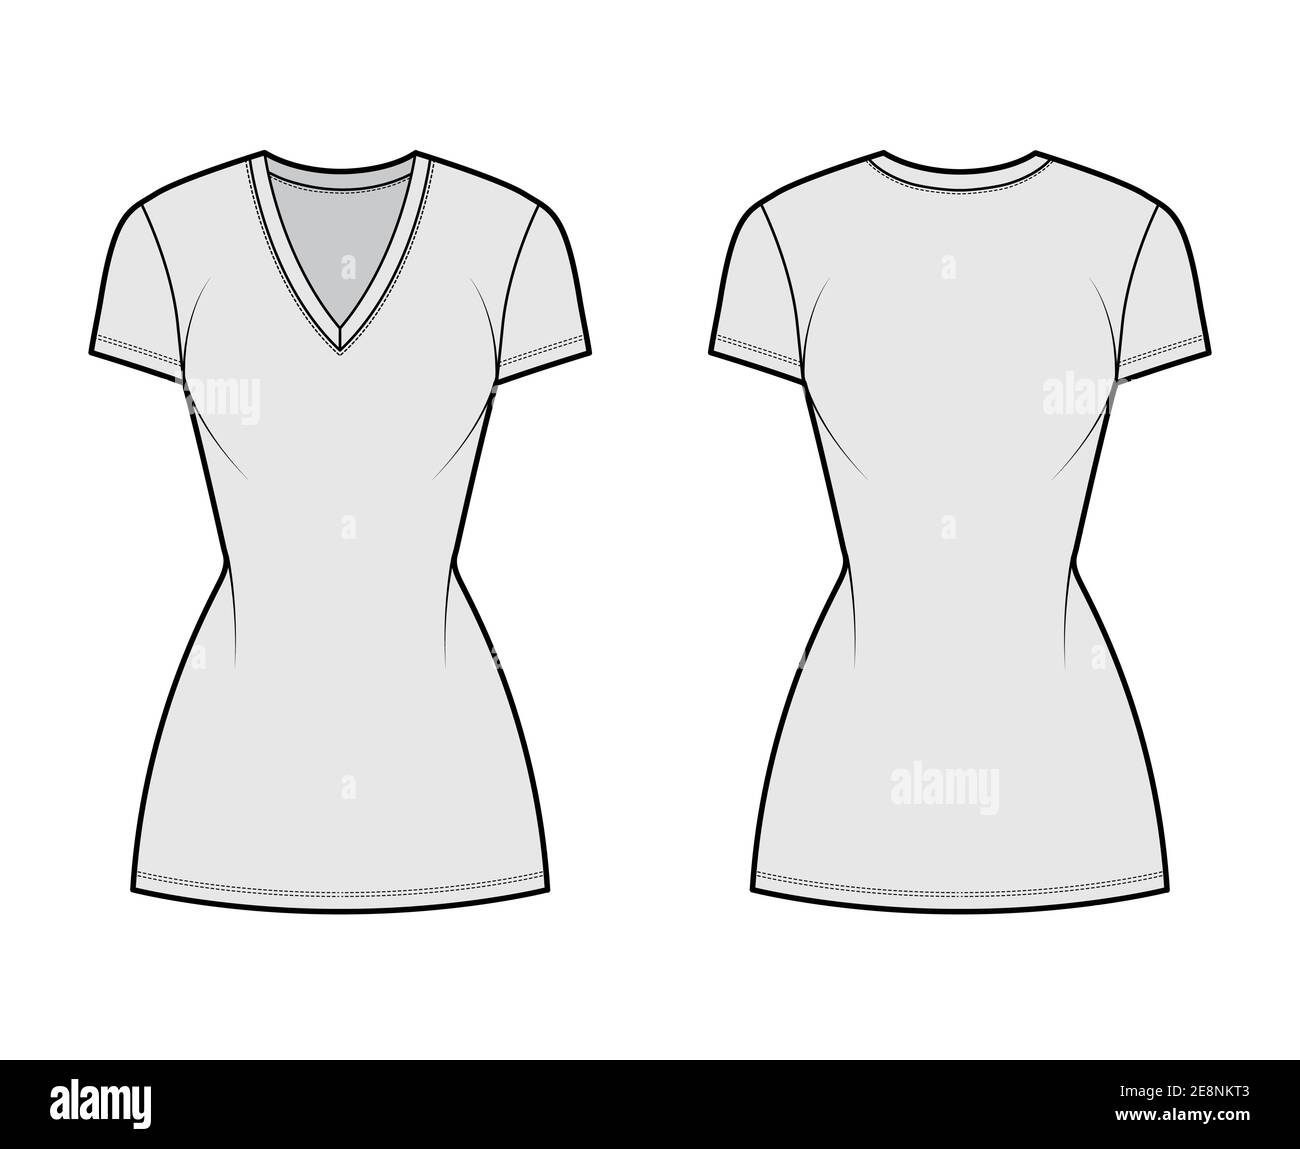 T-shirt dress technical fashion illustration with V-neck, short sleeves, mini length, fitted body, Pencil fullness. Flat apparel template front, back, grey color. Women, men, unisex CAD mockup Stock Vector